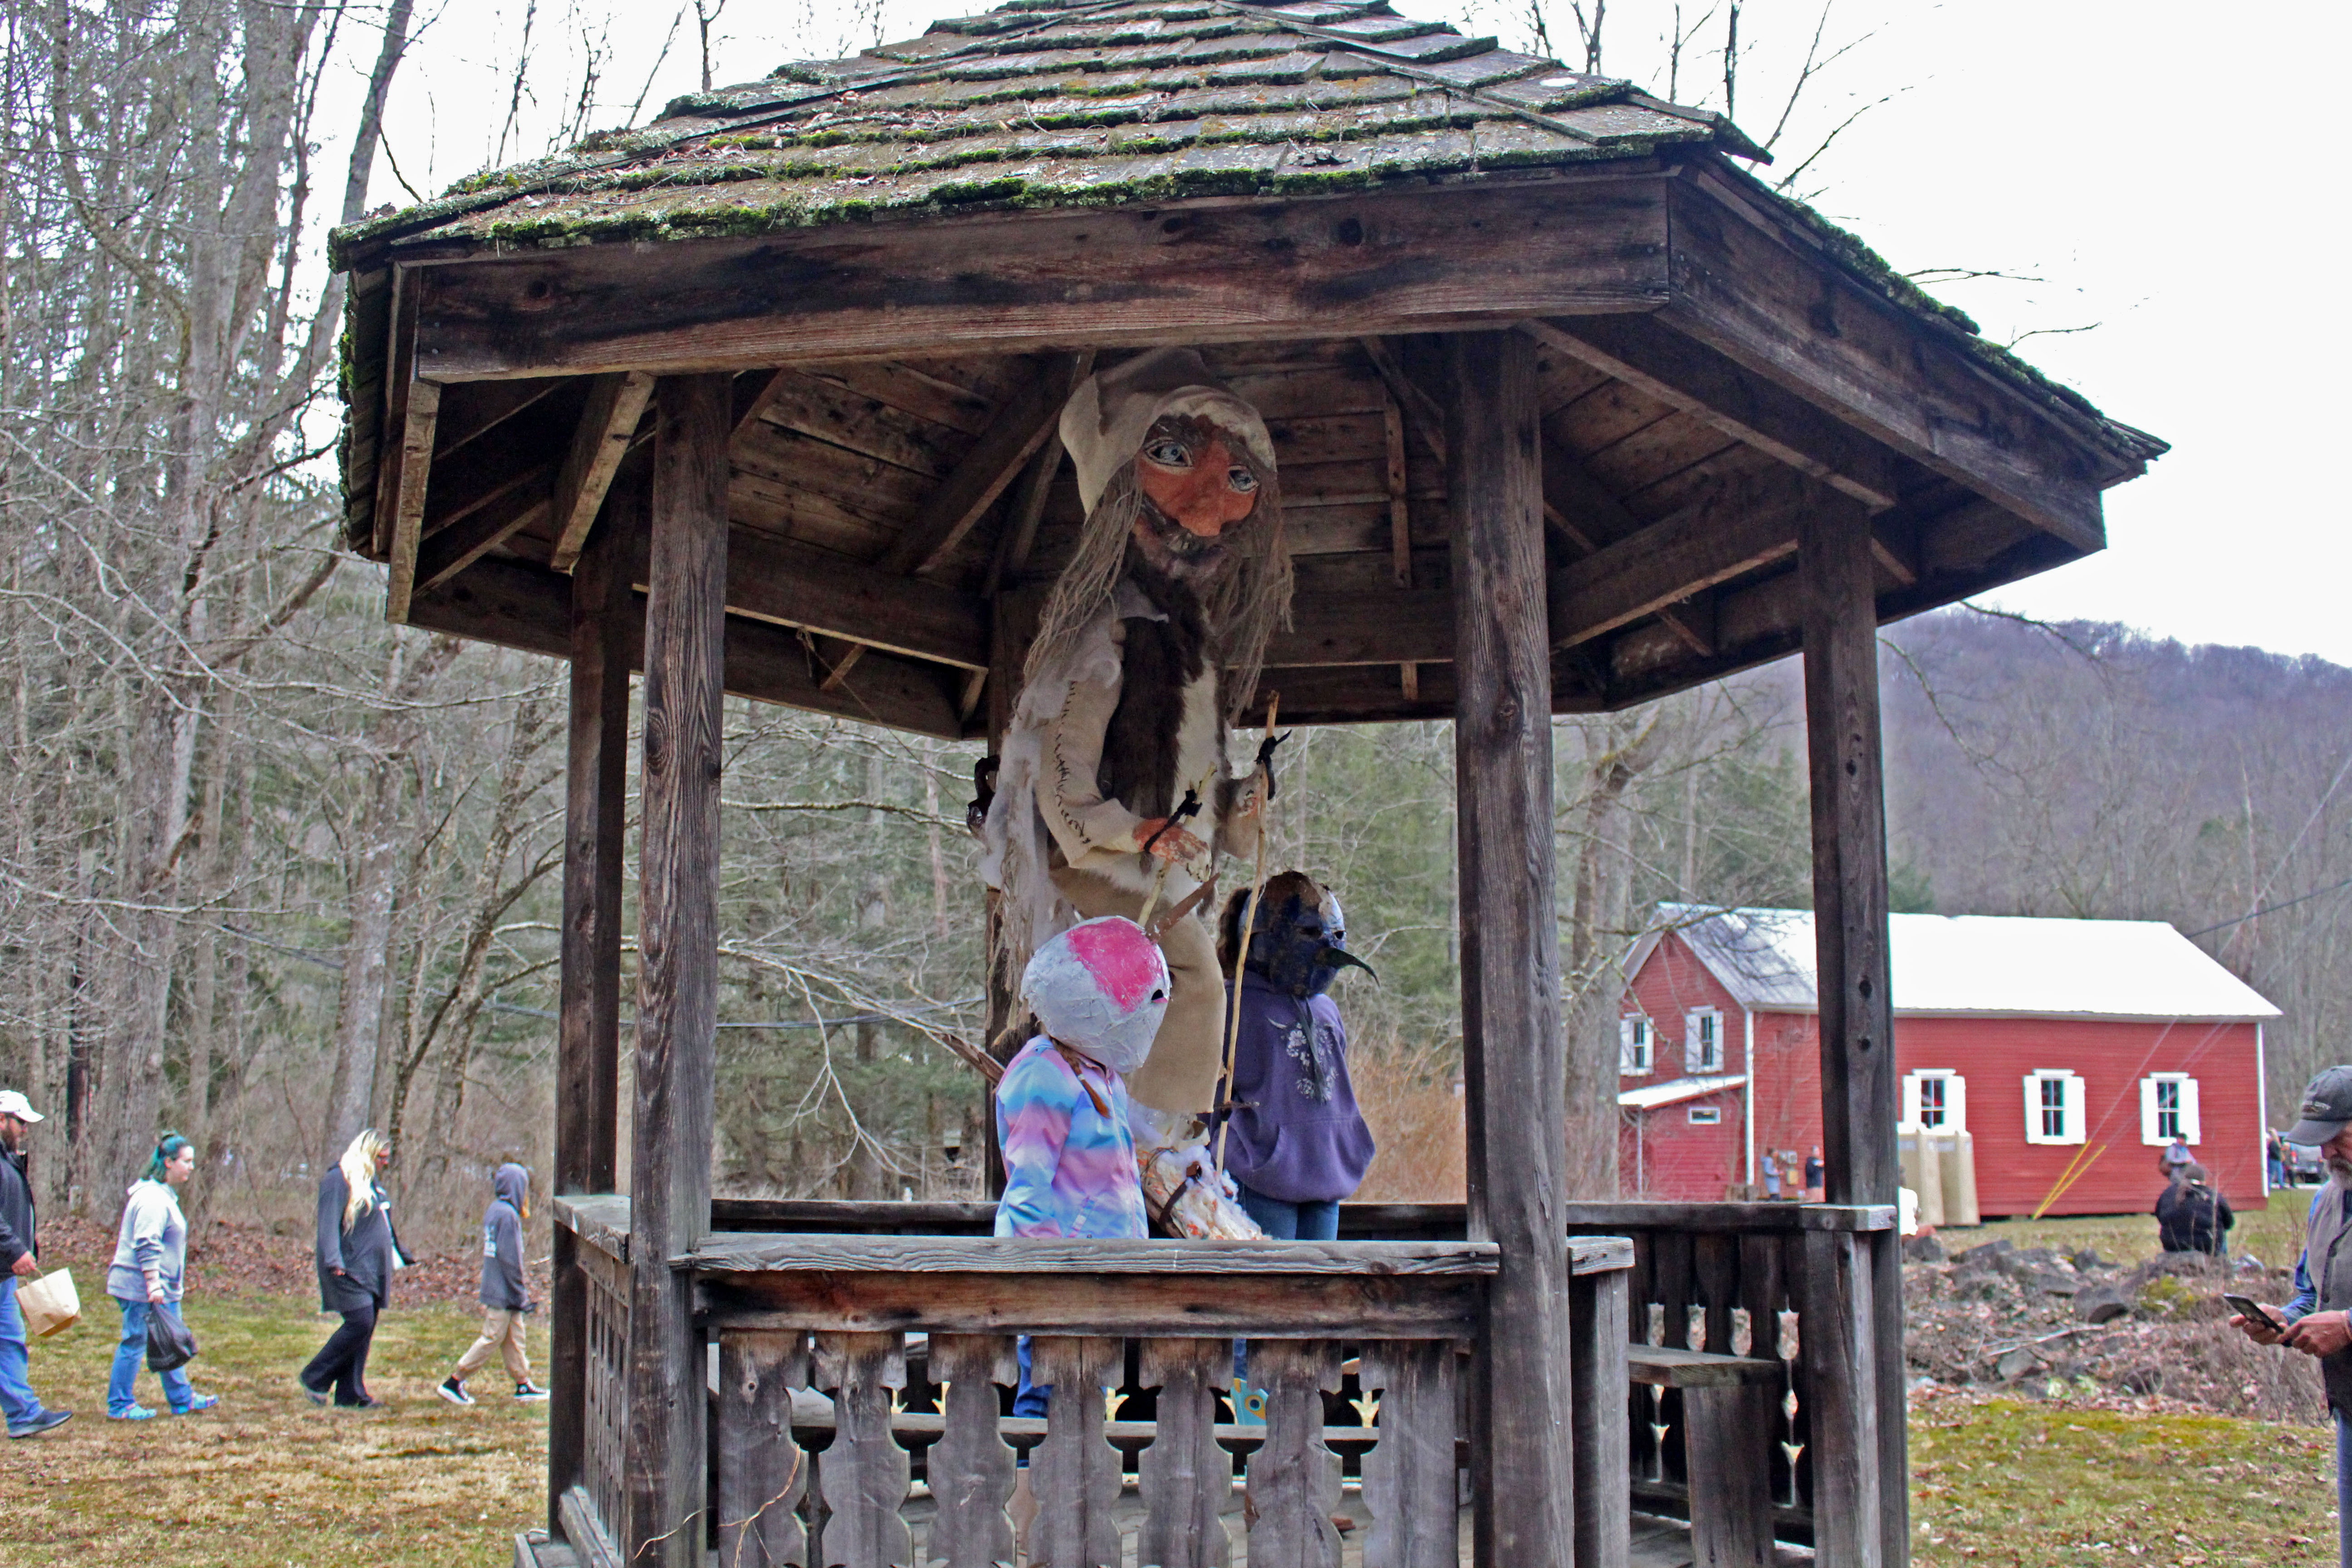 An effigy of Old Man Winter made out of fiber materials hangs in a gazebo outdoors as two children stand beside it wearing round colorful masks.